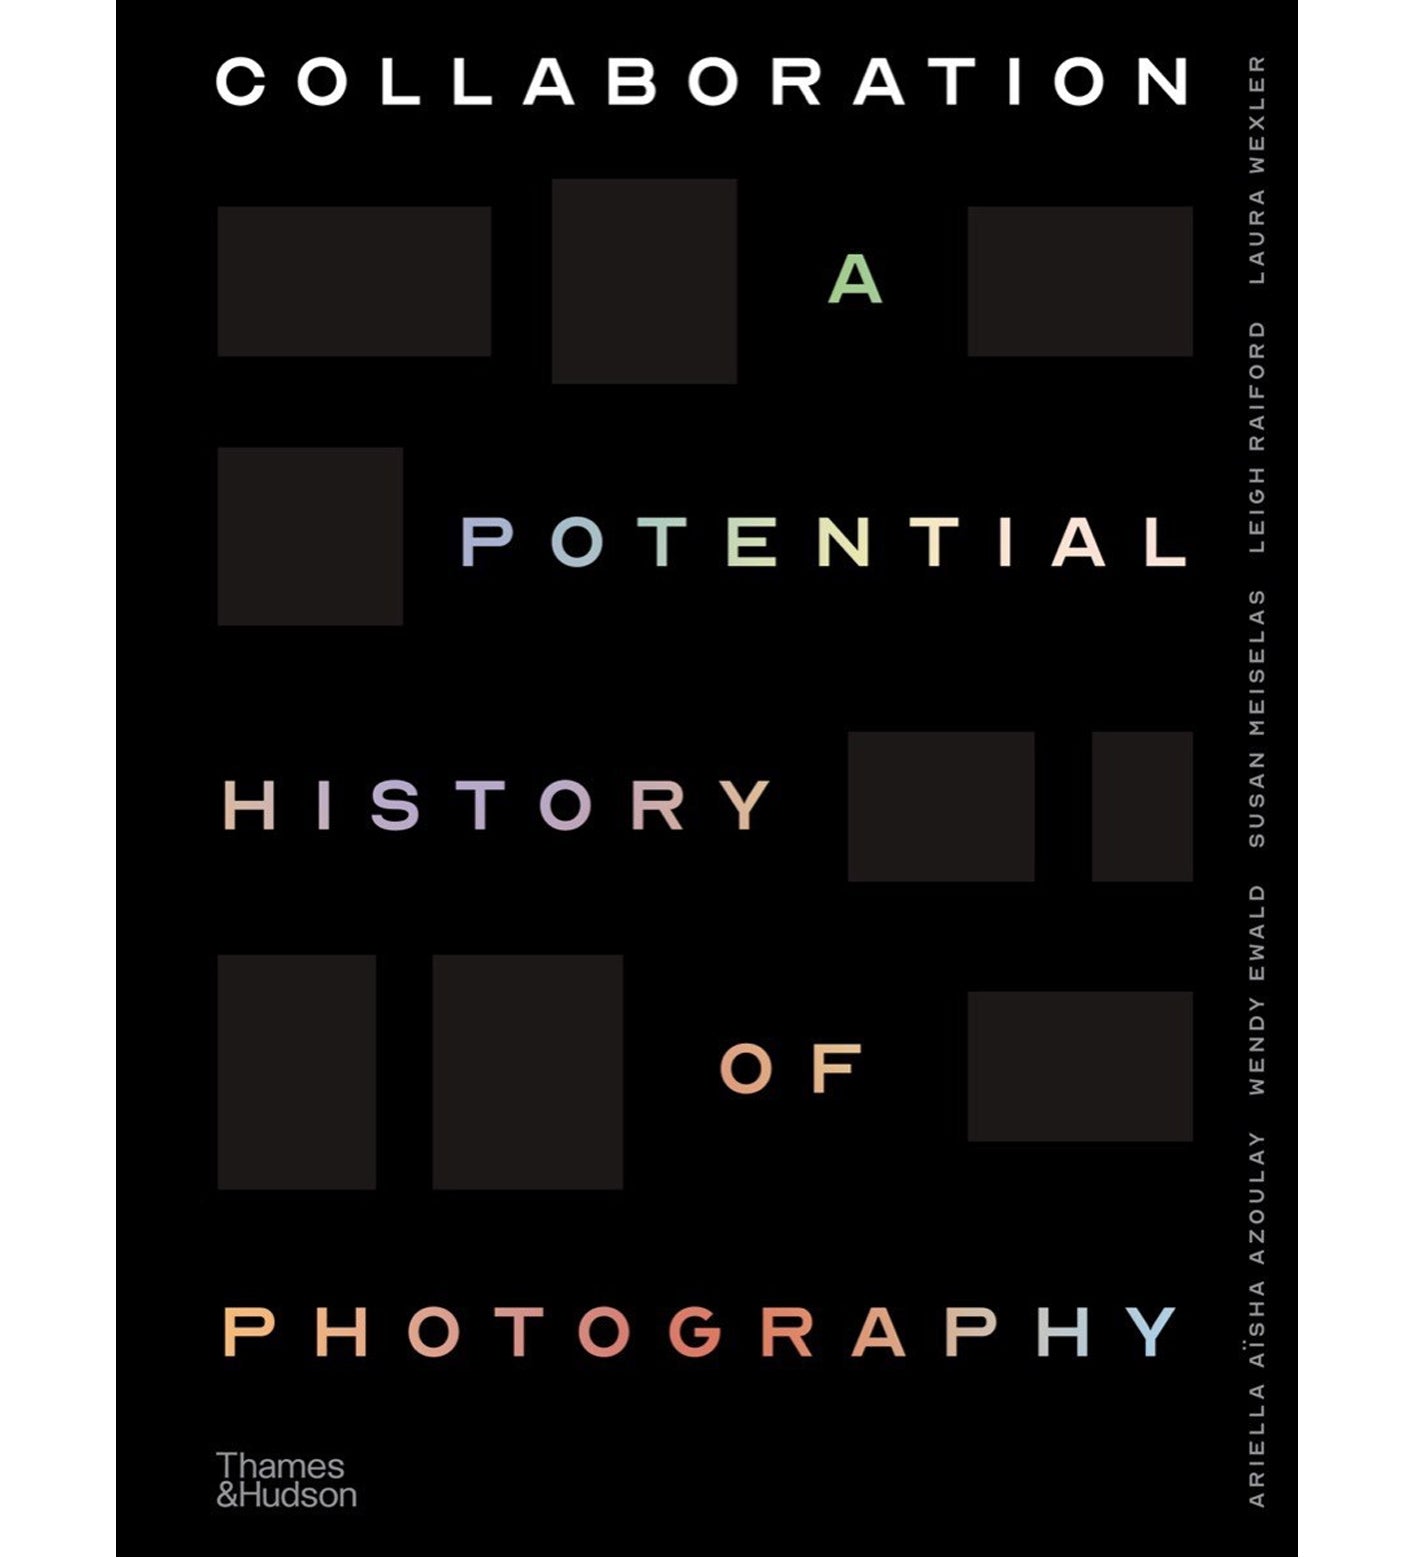 Collaboration - A Potential History of Photography (signed)